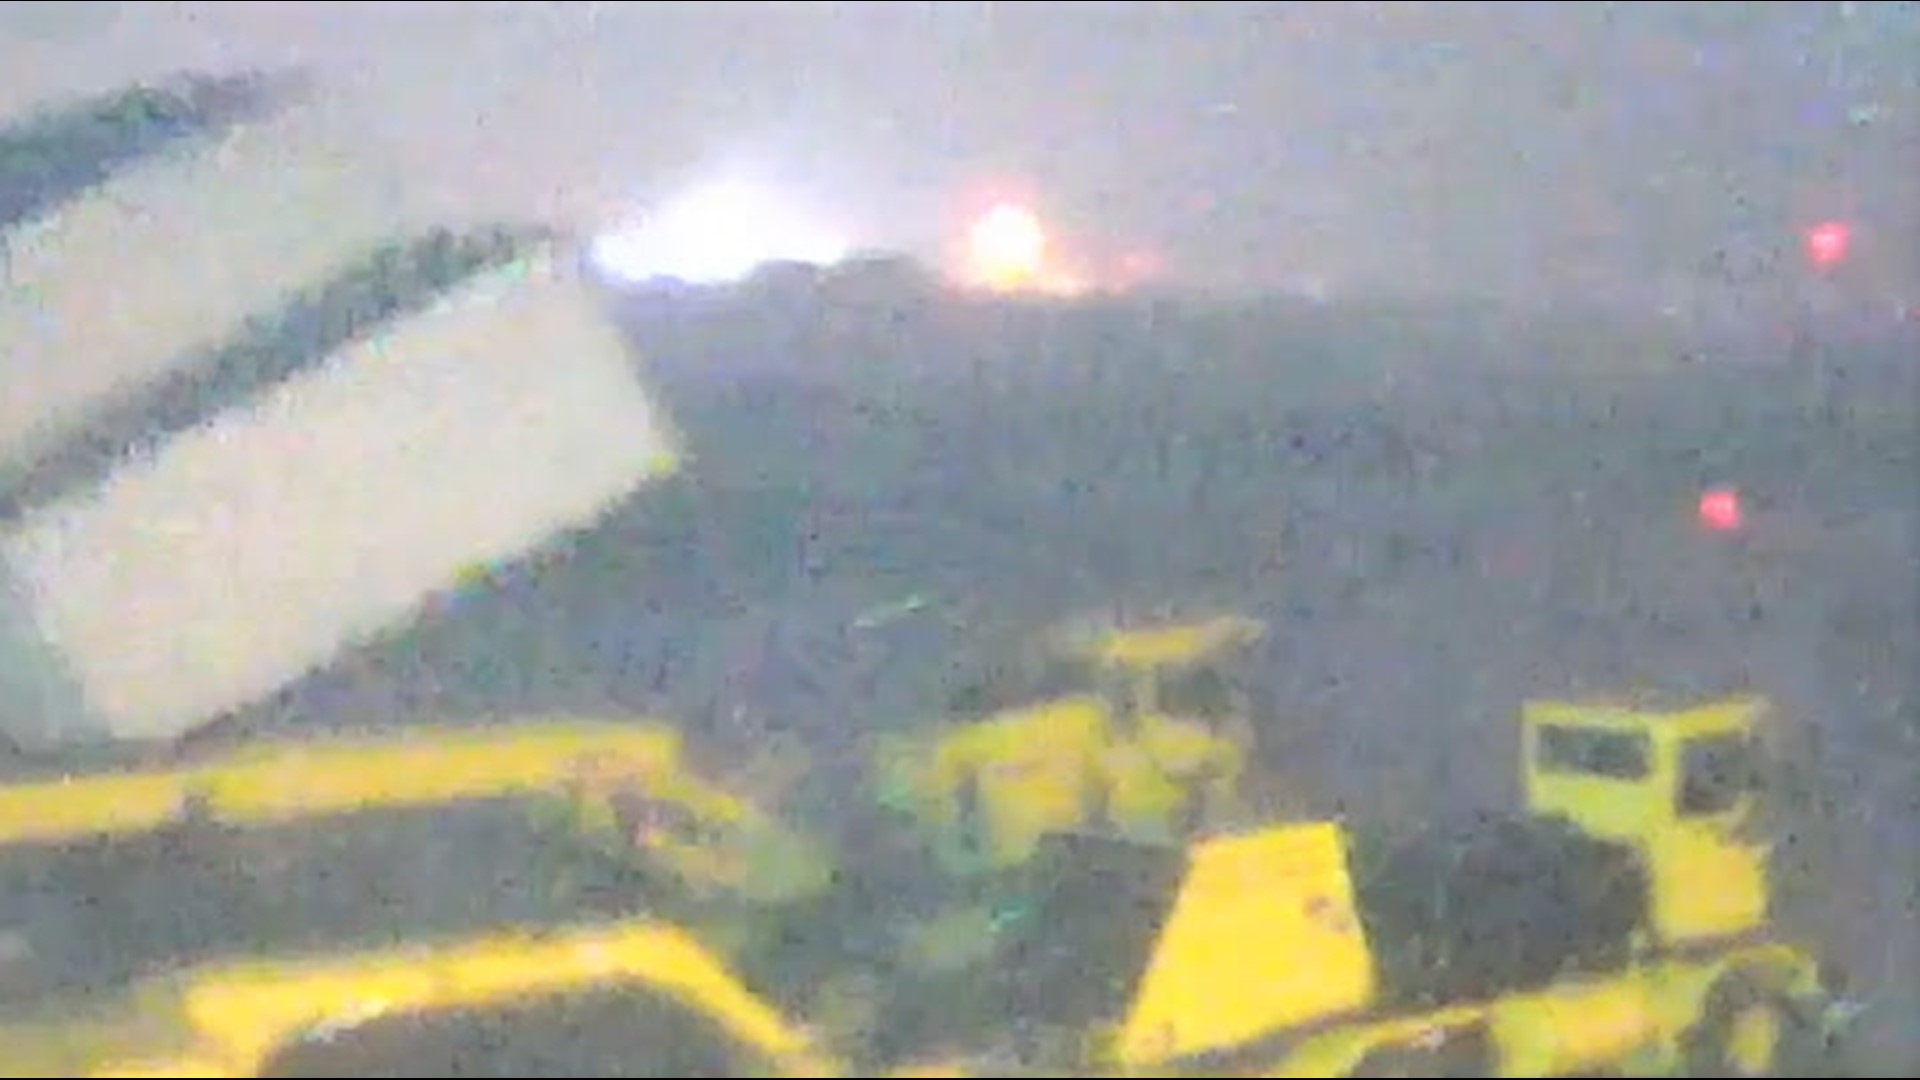 Security camera footage shows a severe thunderstorm blowing a hangar away at the Latrobe, Pennsylvania, airport, Tuesday night.